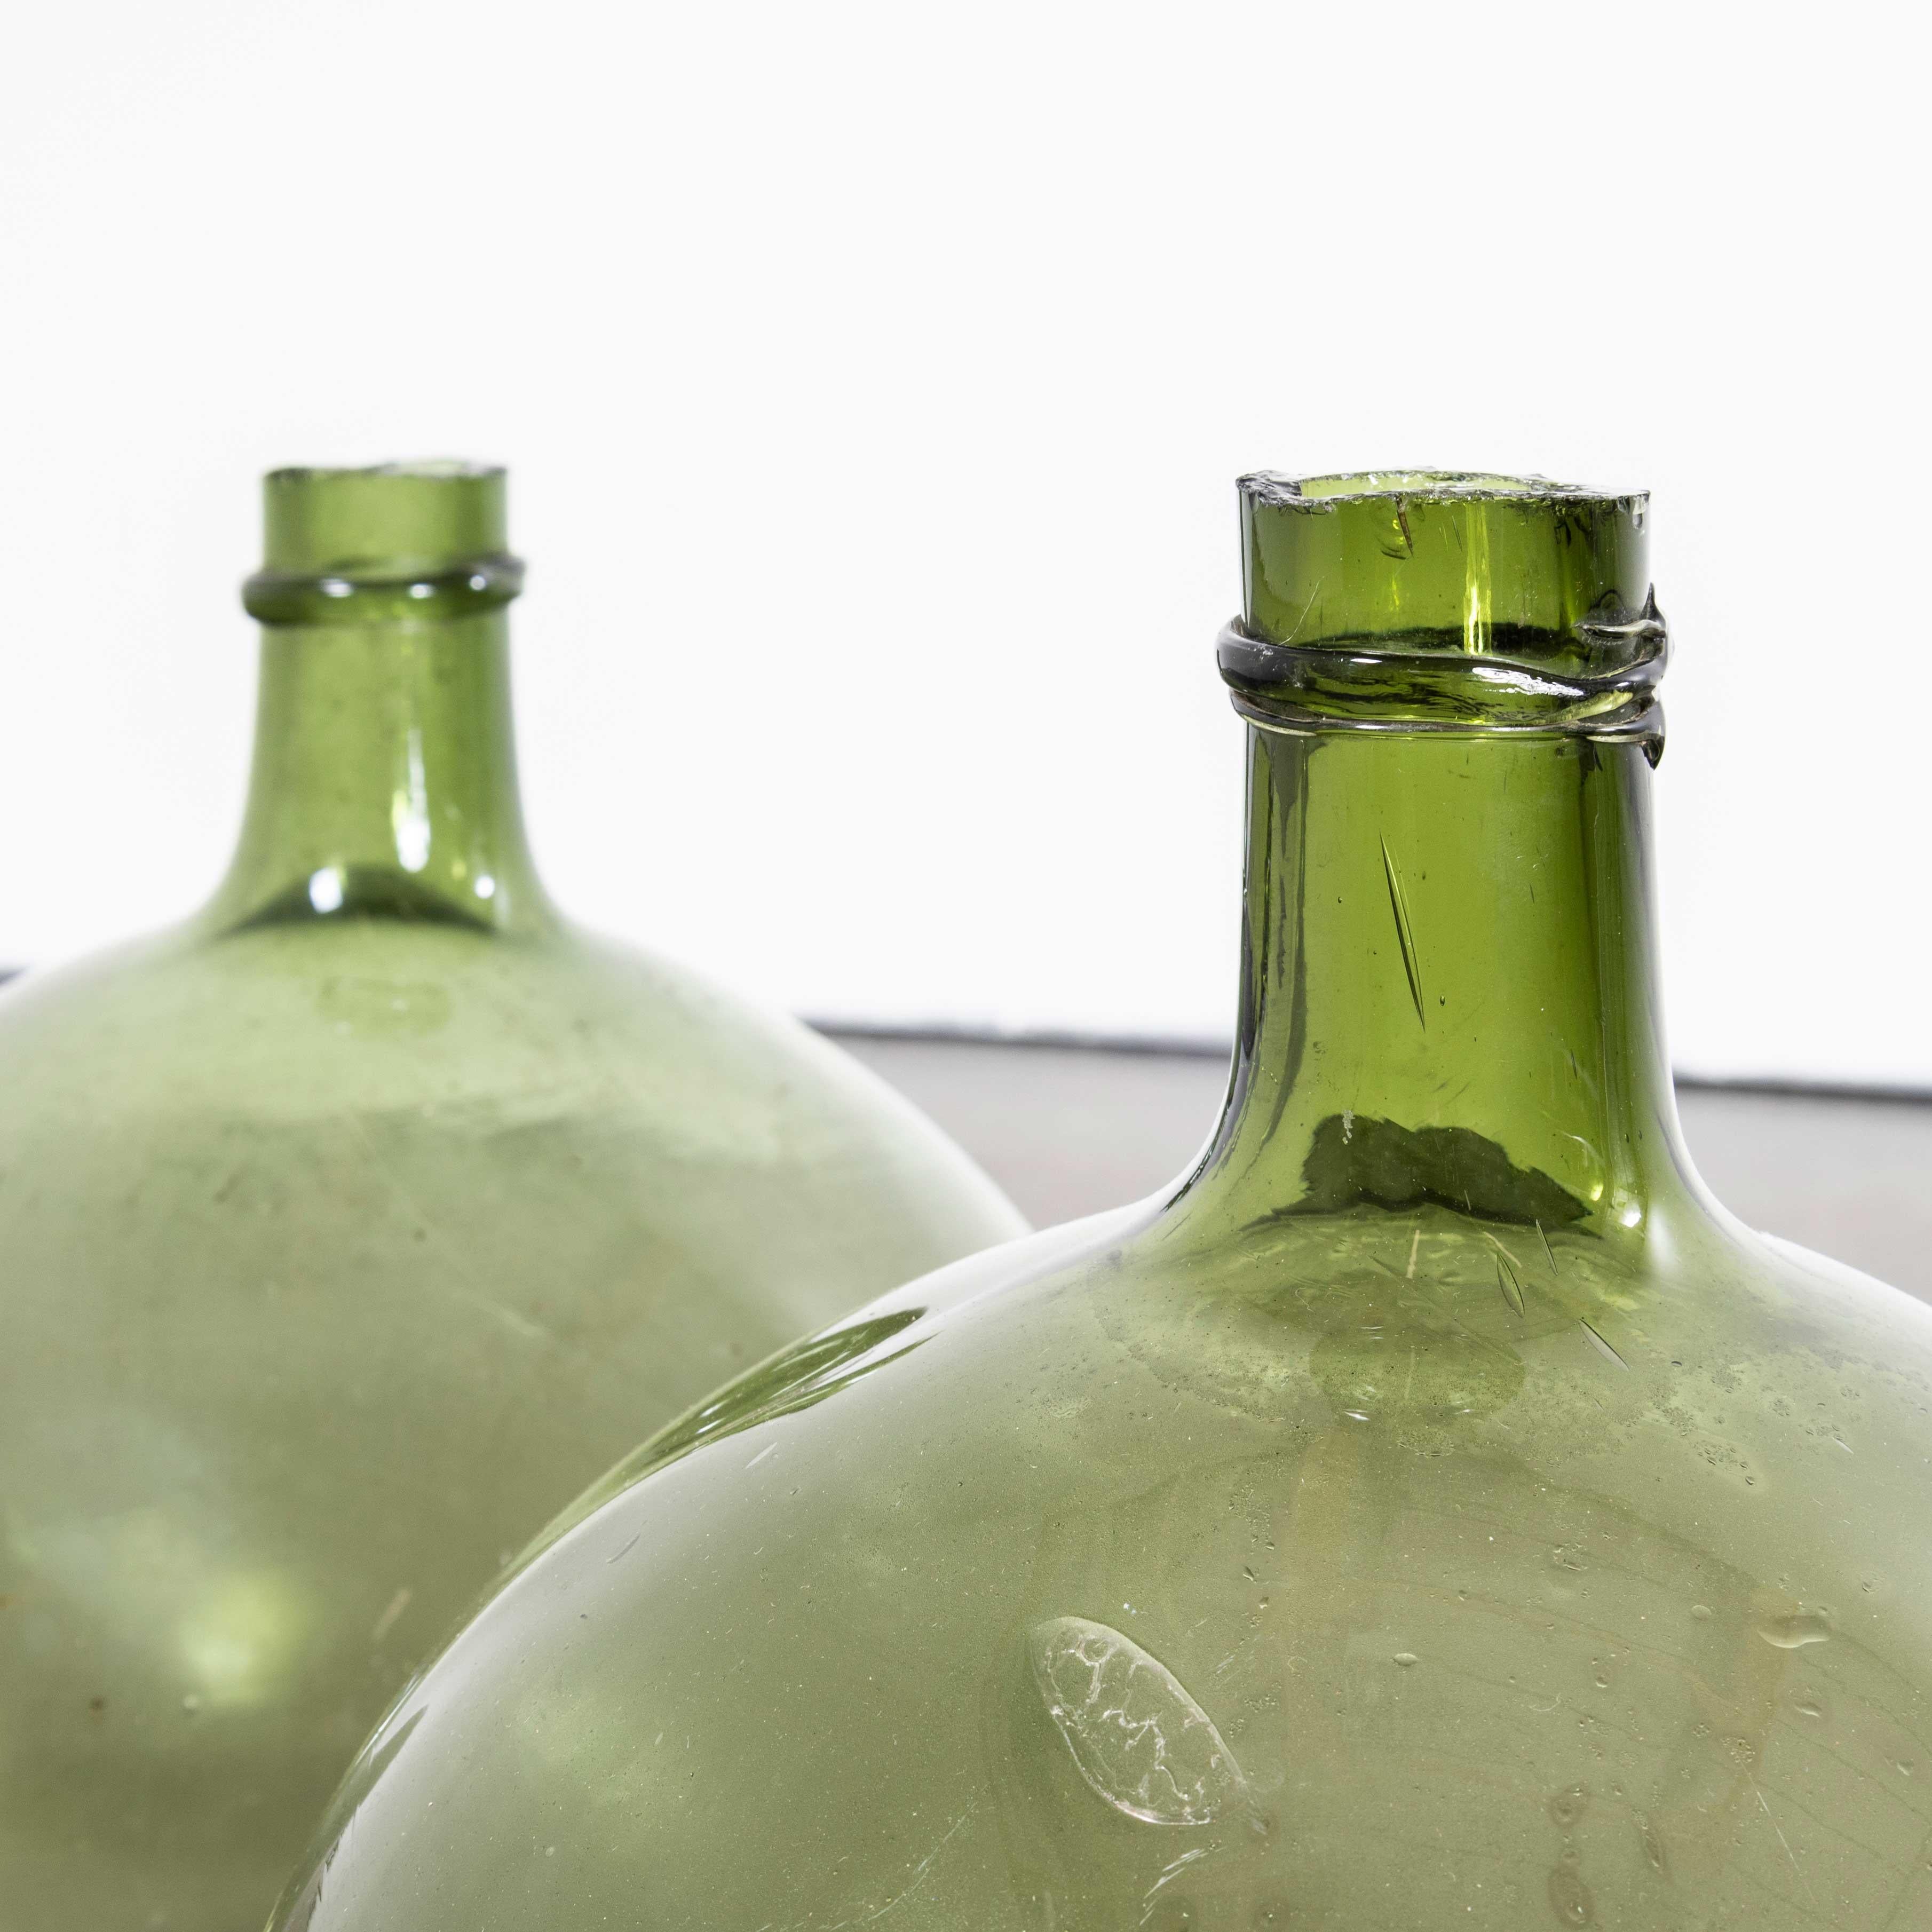 Vintage French Glass Demijohns – Pair (957.24)
Vintage French Glass Demijohns – Pair. A pair of mouth blown glass demijohns used as a traditional containers mainly for wine storage and transport. These demijohns have been carefully cleaned.